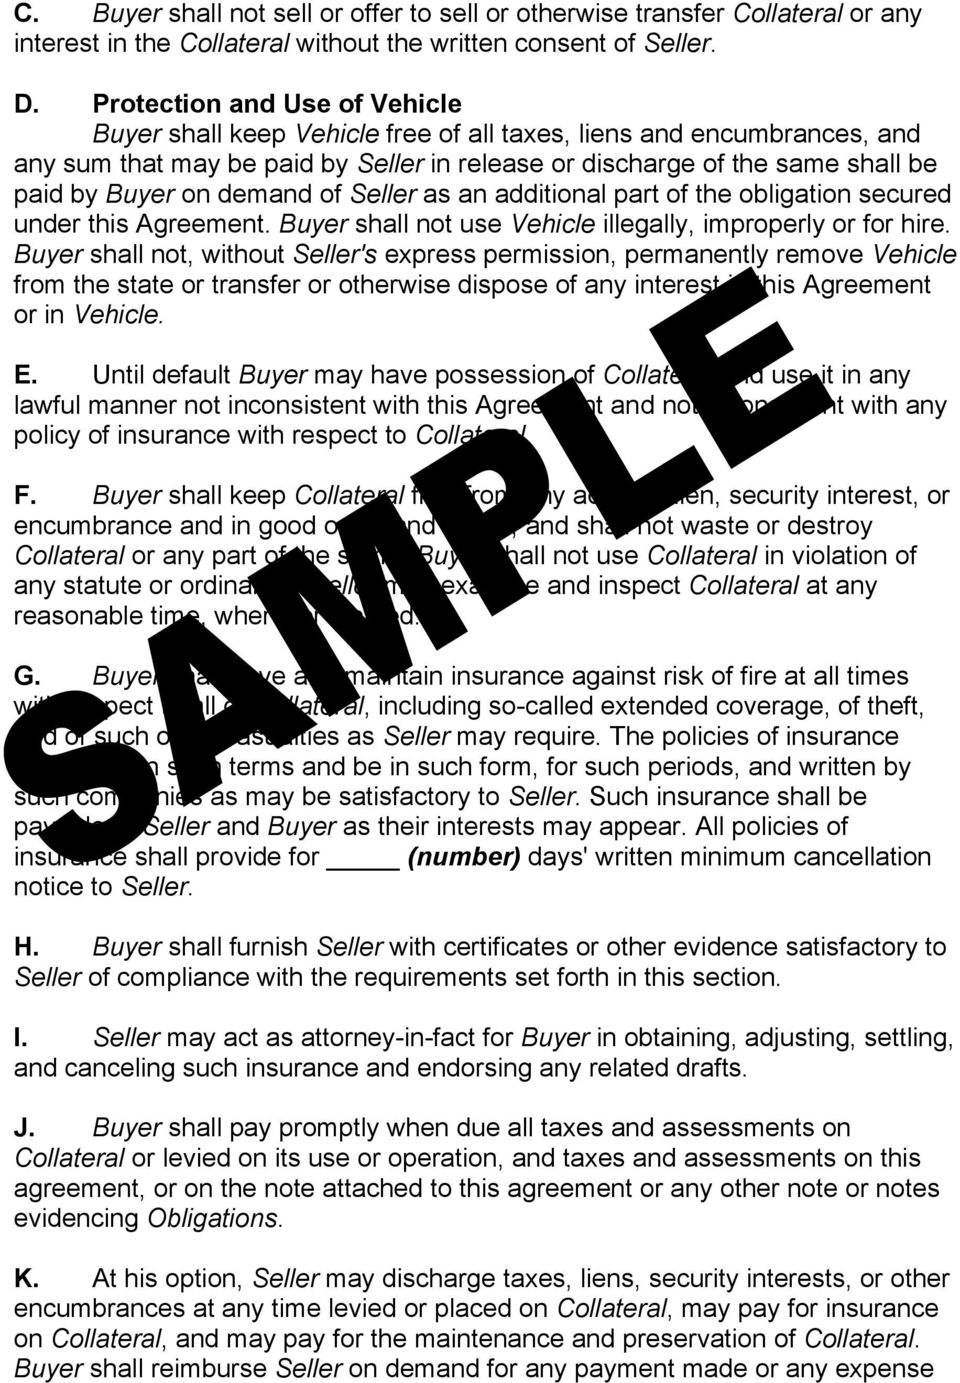 demand of Seller as an additional part of the obligation secured under this Agreement. Buyer shall not use Vehicle illegally, improperly or for hire.